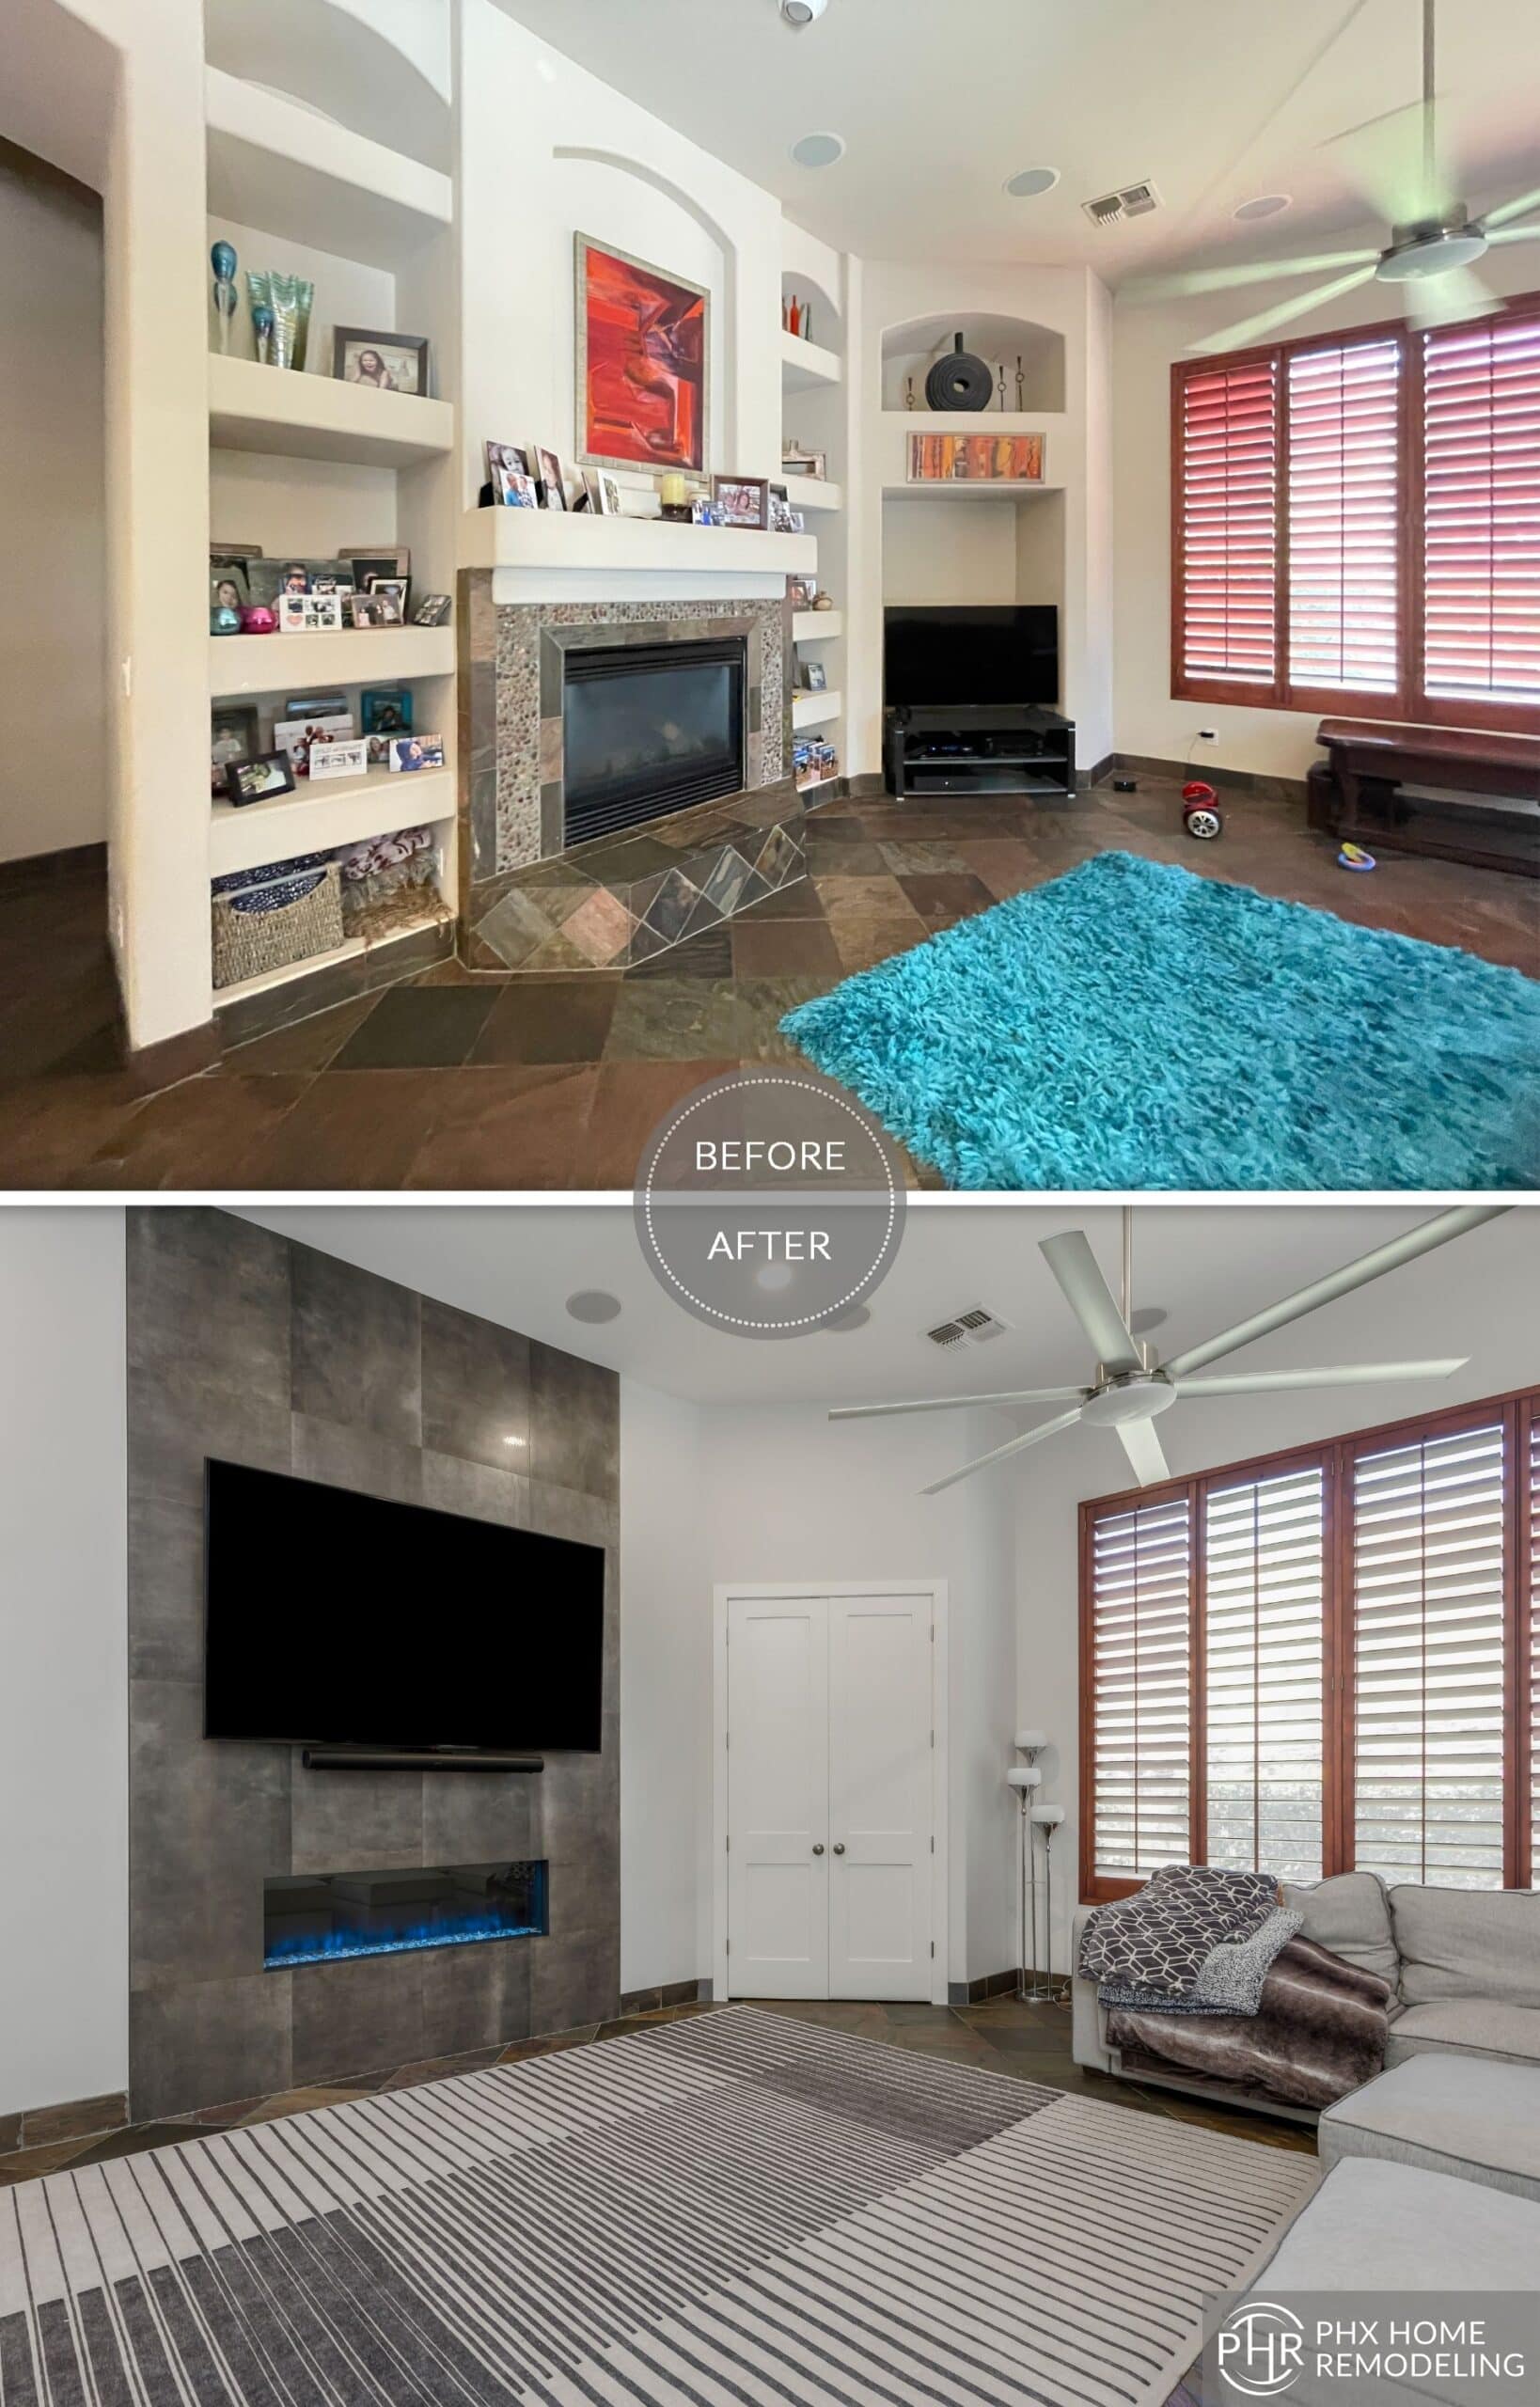 See The Amazing Transformation Of Our Living Room Remodel With Before And After Shots - General Contractor Services